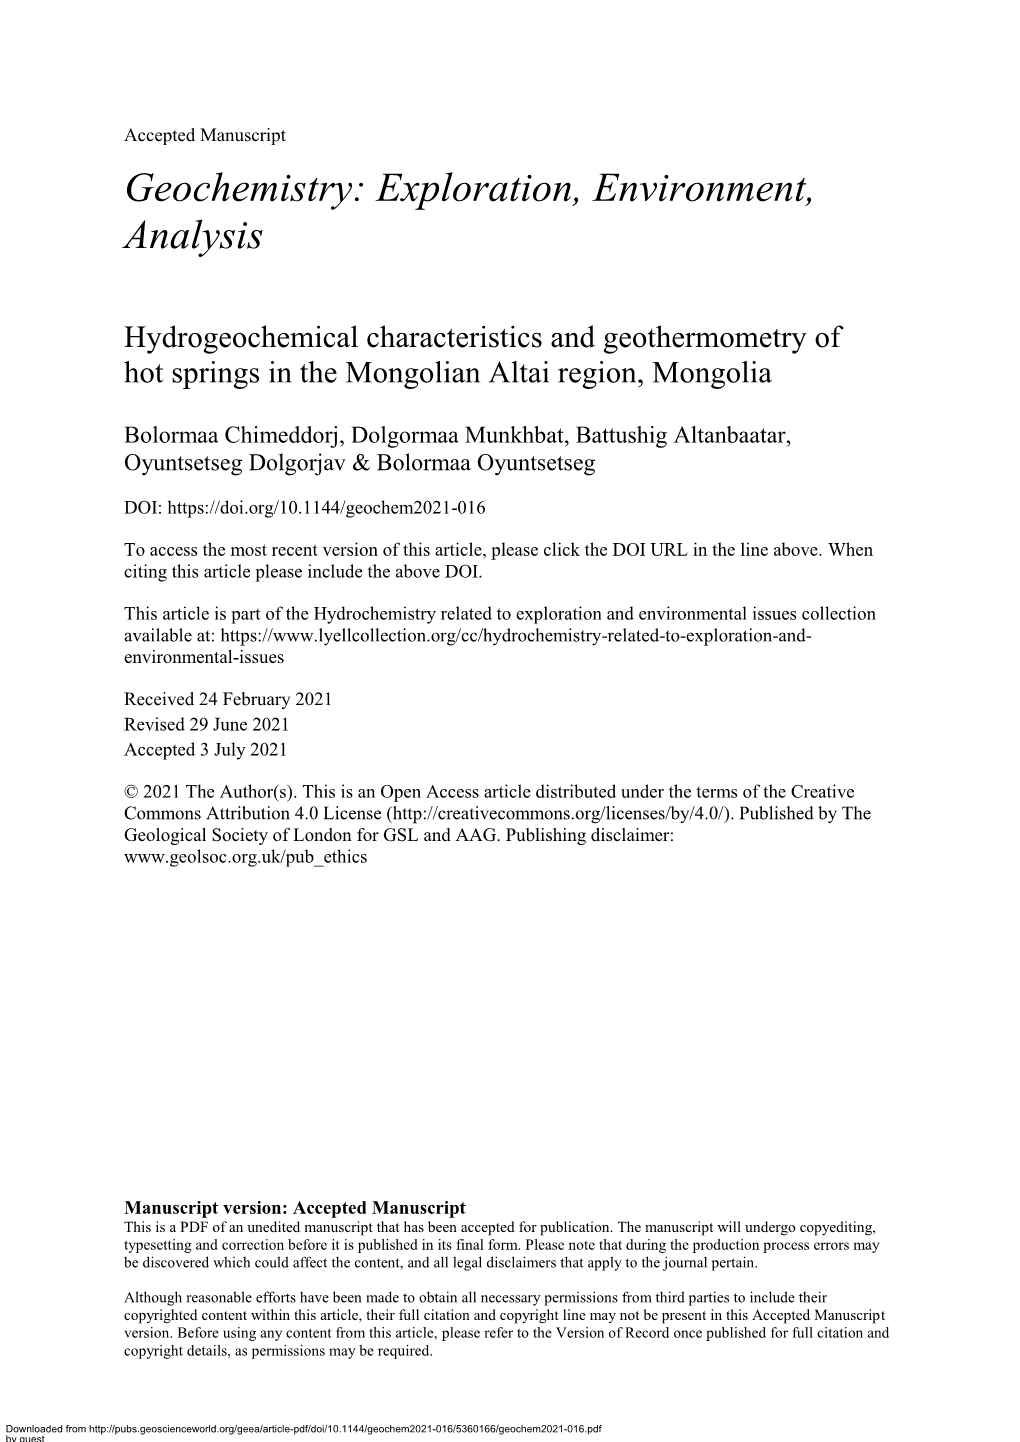 Hydrogeochemical Characteristics and Geothermometry of Hot Springs in the Mongolian Altai Region, Mongolia